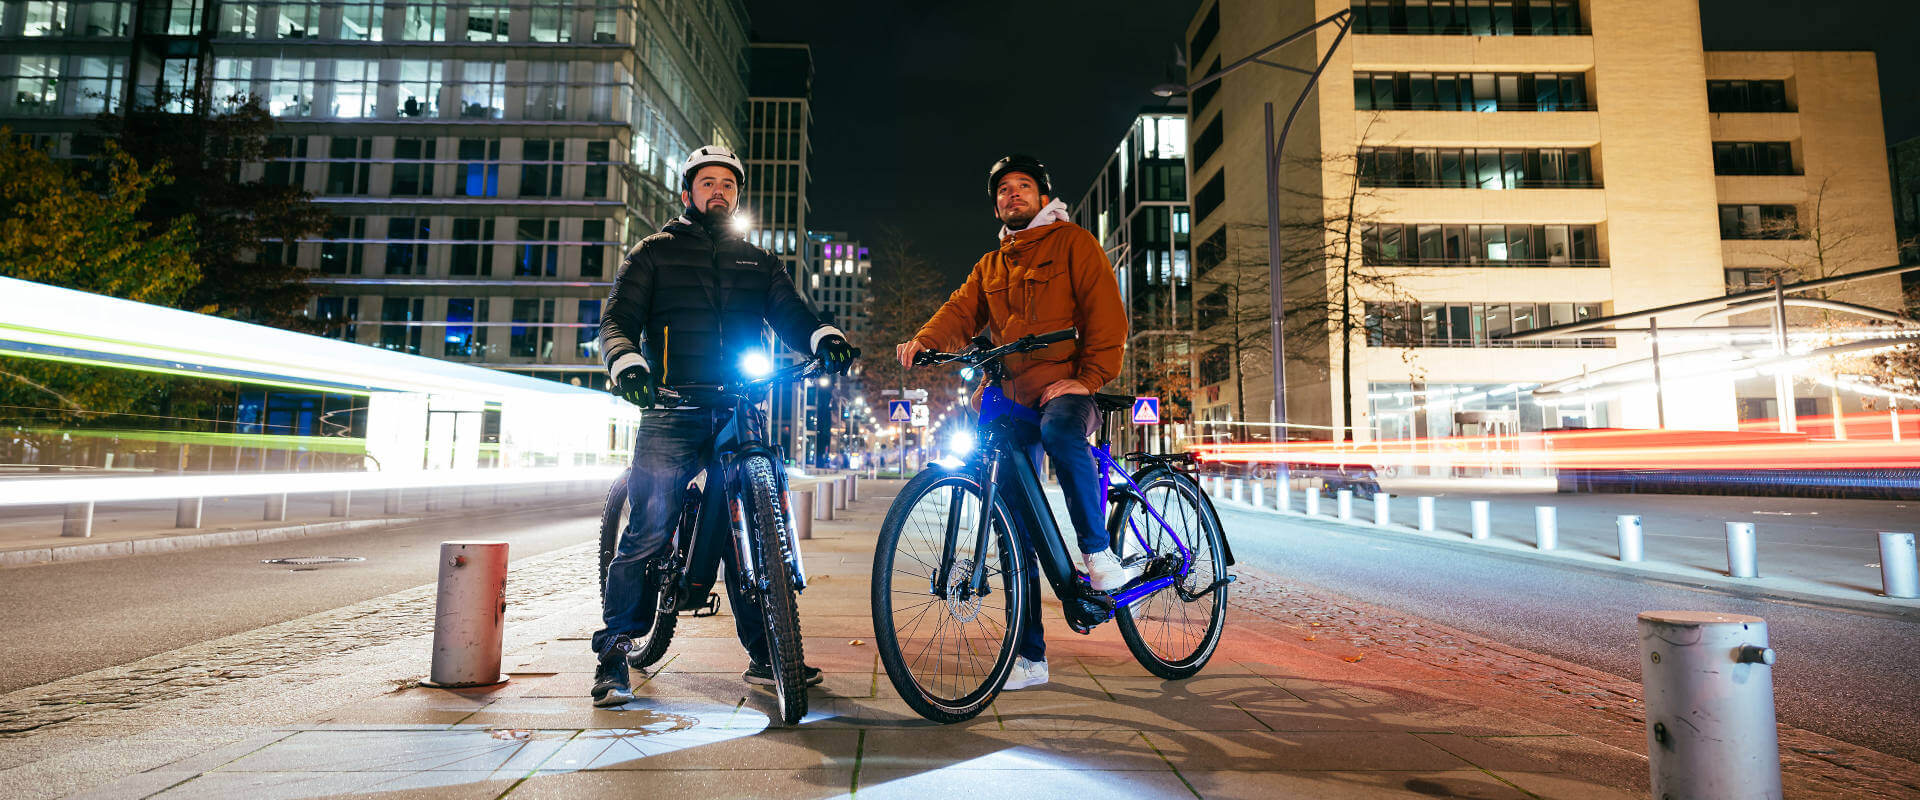 Feel the excitement of cycling in the city at night